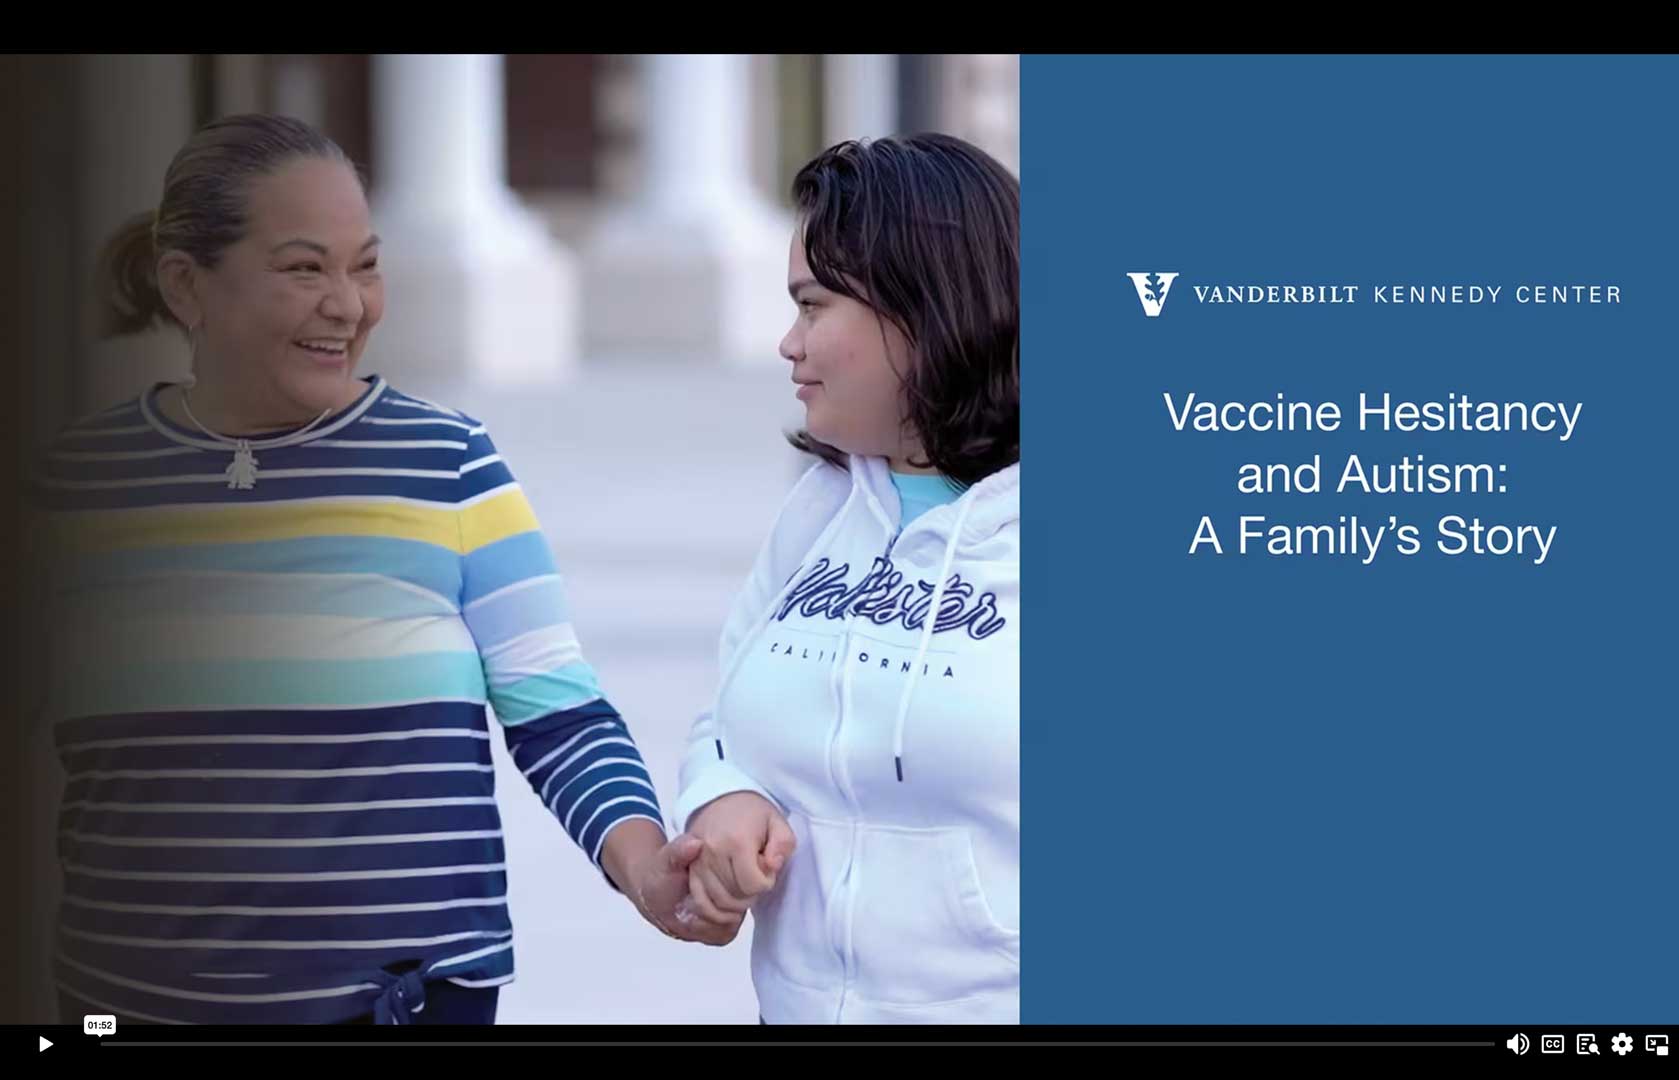 Vaccine Hesitancy and Autism: A Family's Story